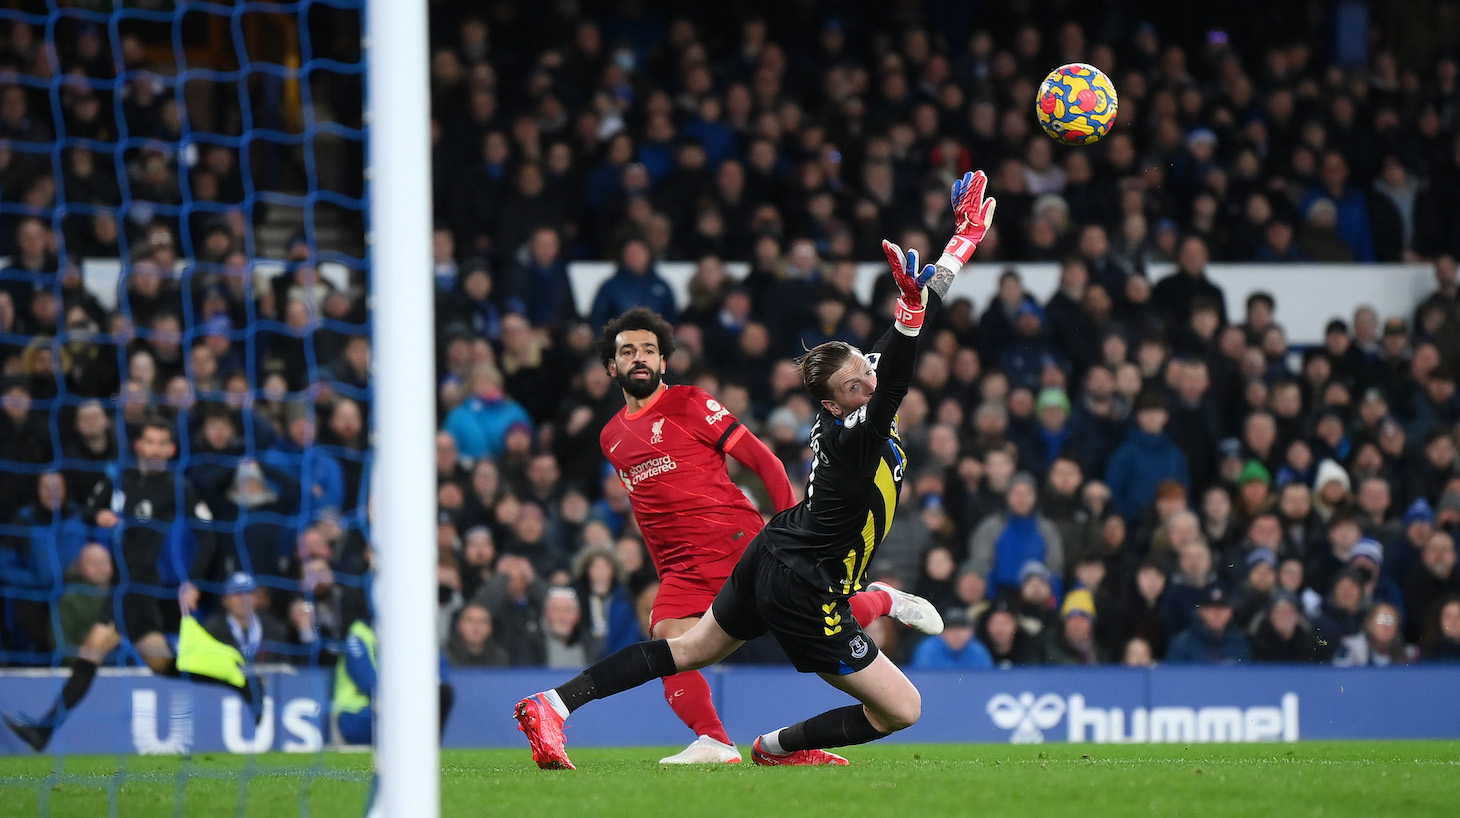 Jordan Pickford of Everton fails to save the Liverpool second goal scored by Mohamed Salah during the Premier League match between Everton and Liverpool at Goodison Park on December 01, 2021 in Liverpool, England.